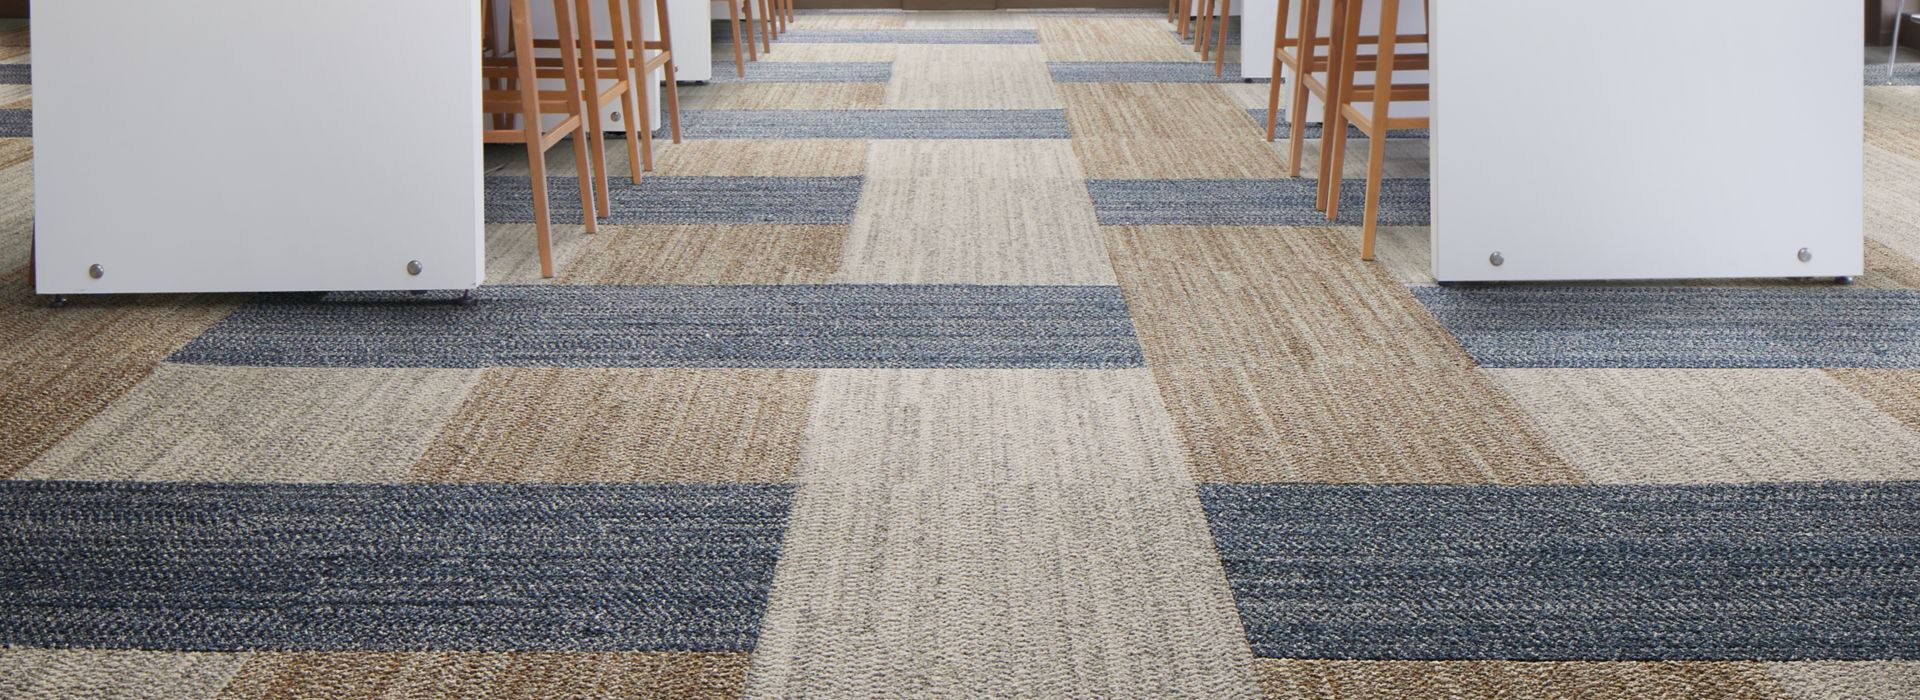 Interface Third Space 307 carpet tile in casual dining seating area